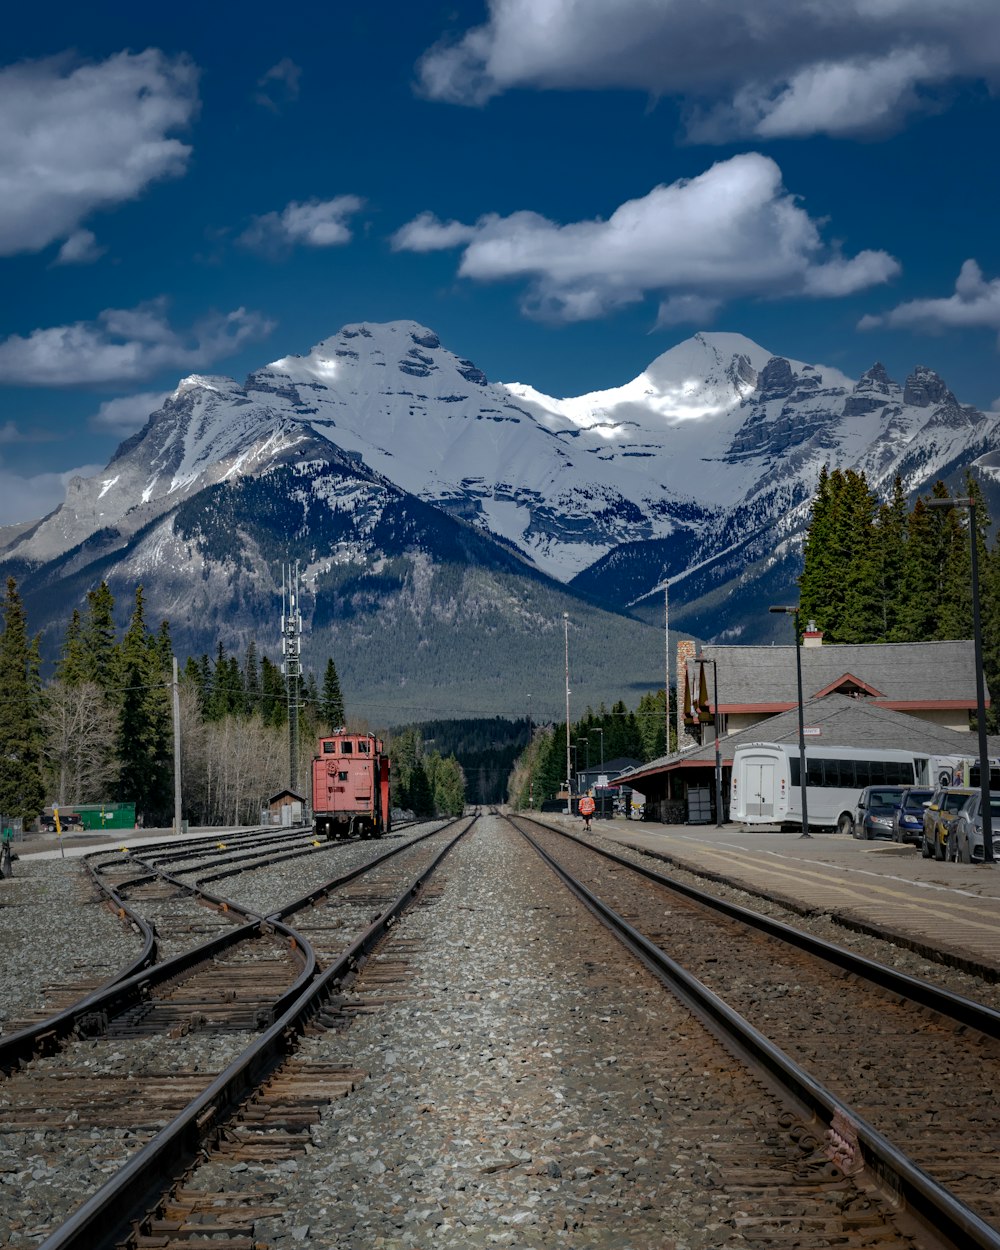 train tracks with a snowy mountain in the background